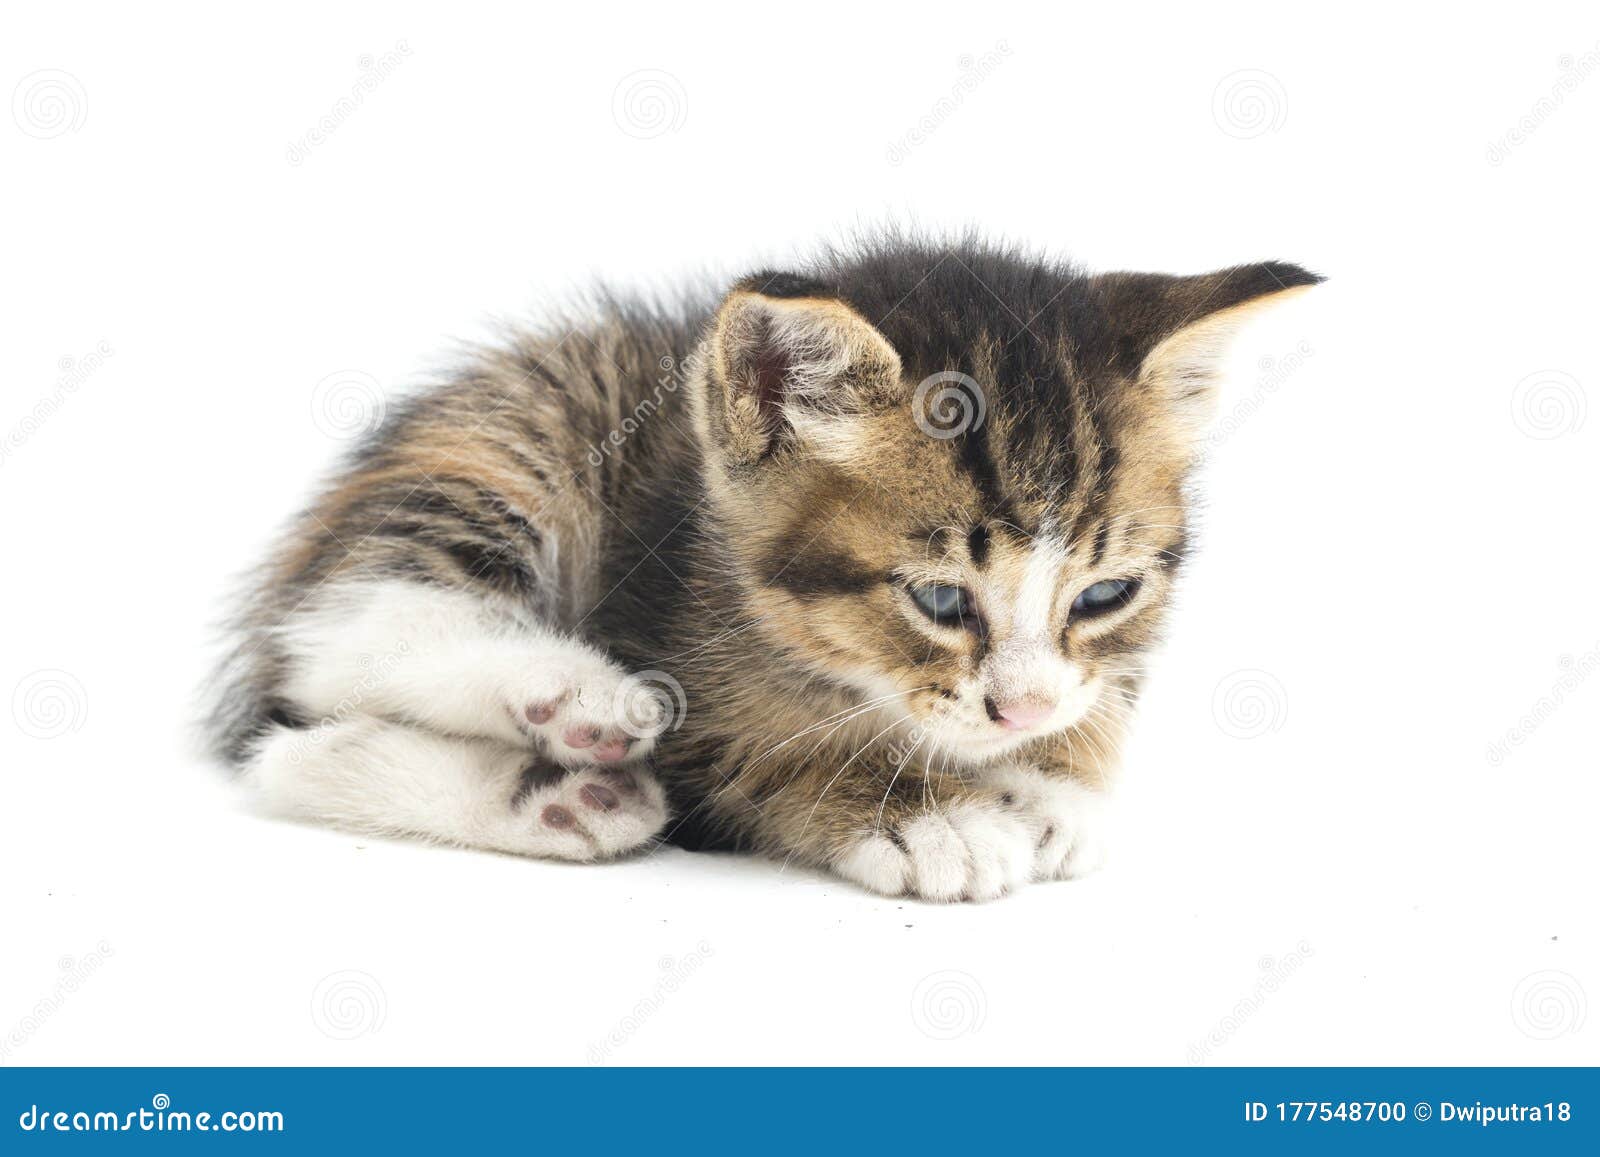 Domestic Calico Kitten Cat Isolated On White Stock Photo Image Of Face Furry 177548700